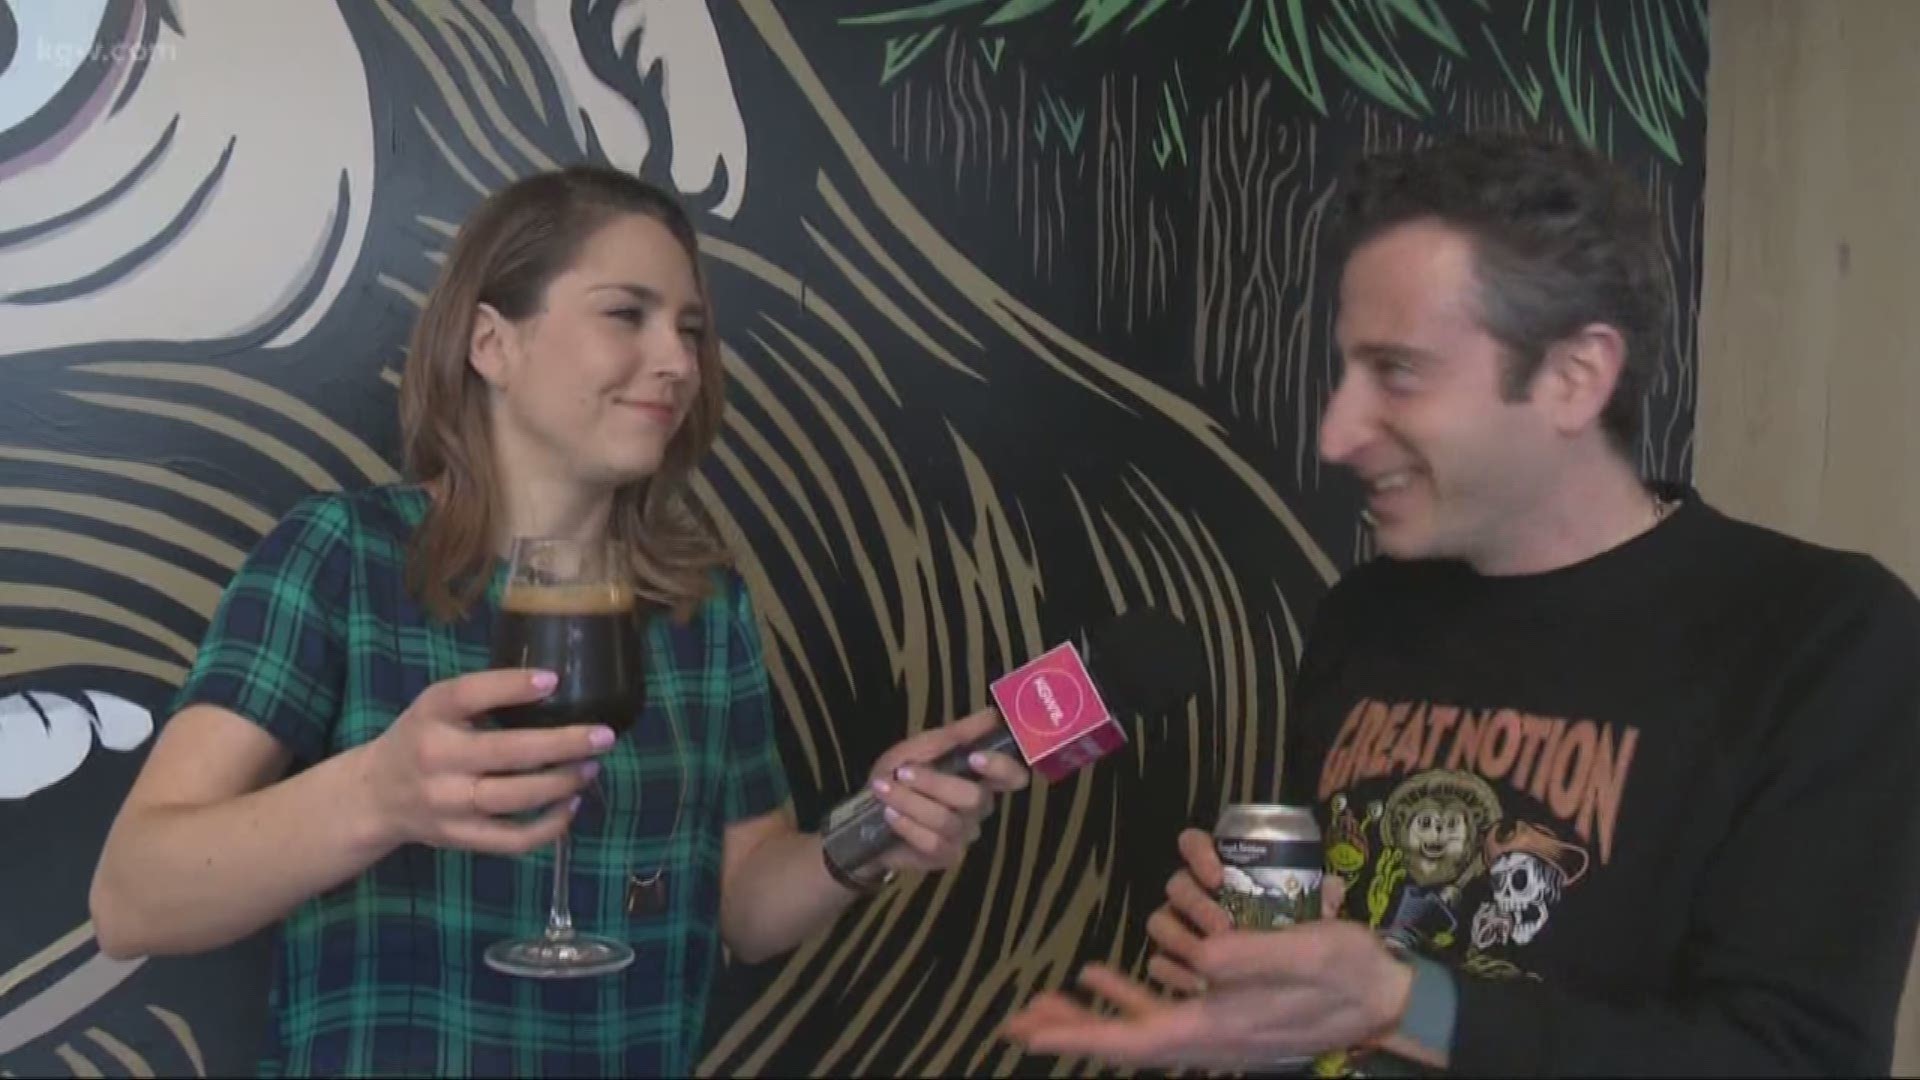 Cassidy teams up with Great Notion Brewing to reveal a secret beer recipe.

#TonightwithCassiy